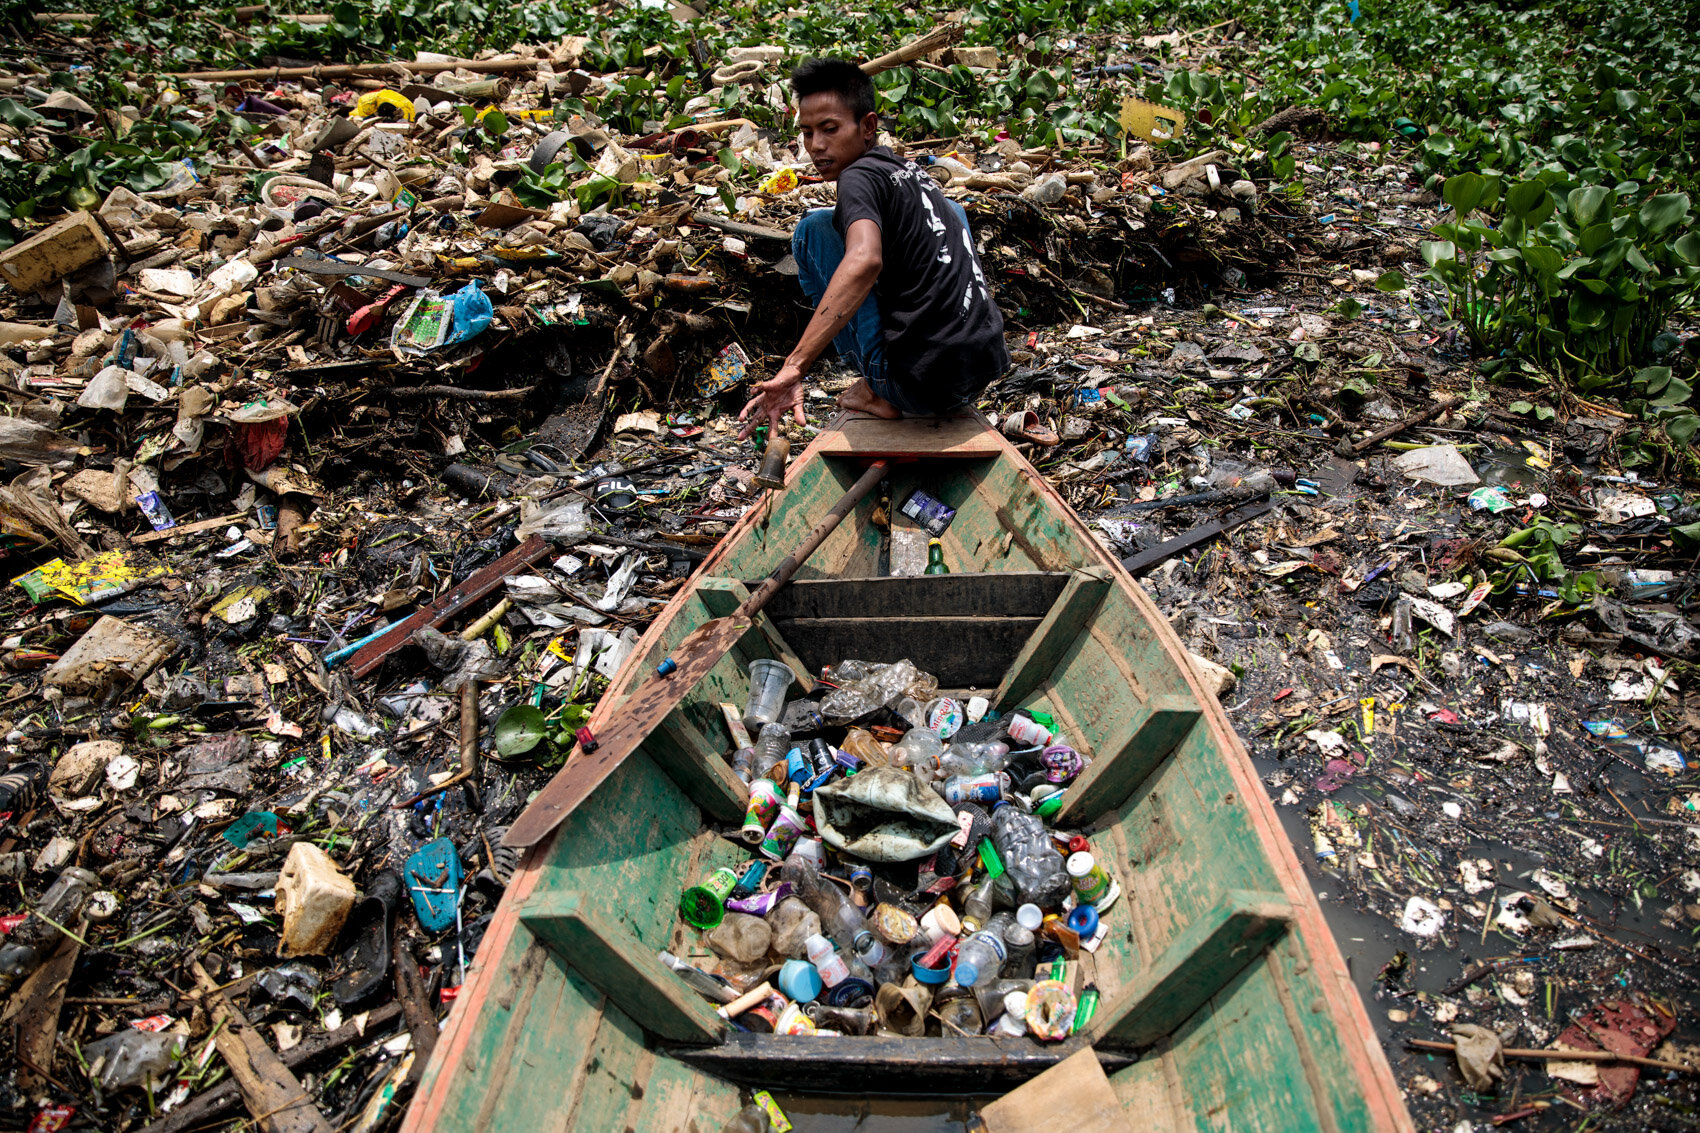  BANDUNG, INDONESIA: Plastic scavenger Rudiana, 24 from Cihampelos Village collects plastic at the Saguling reservoir on the headwater of the Citarum river on November 21st, 2019 in Bandung, Java, Indonesia. 